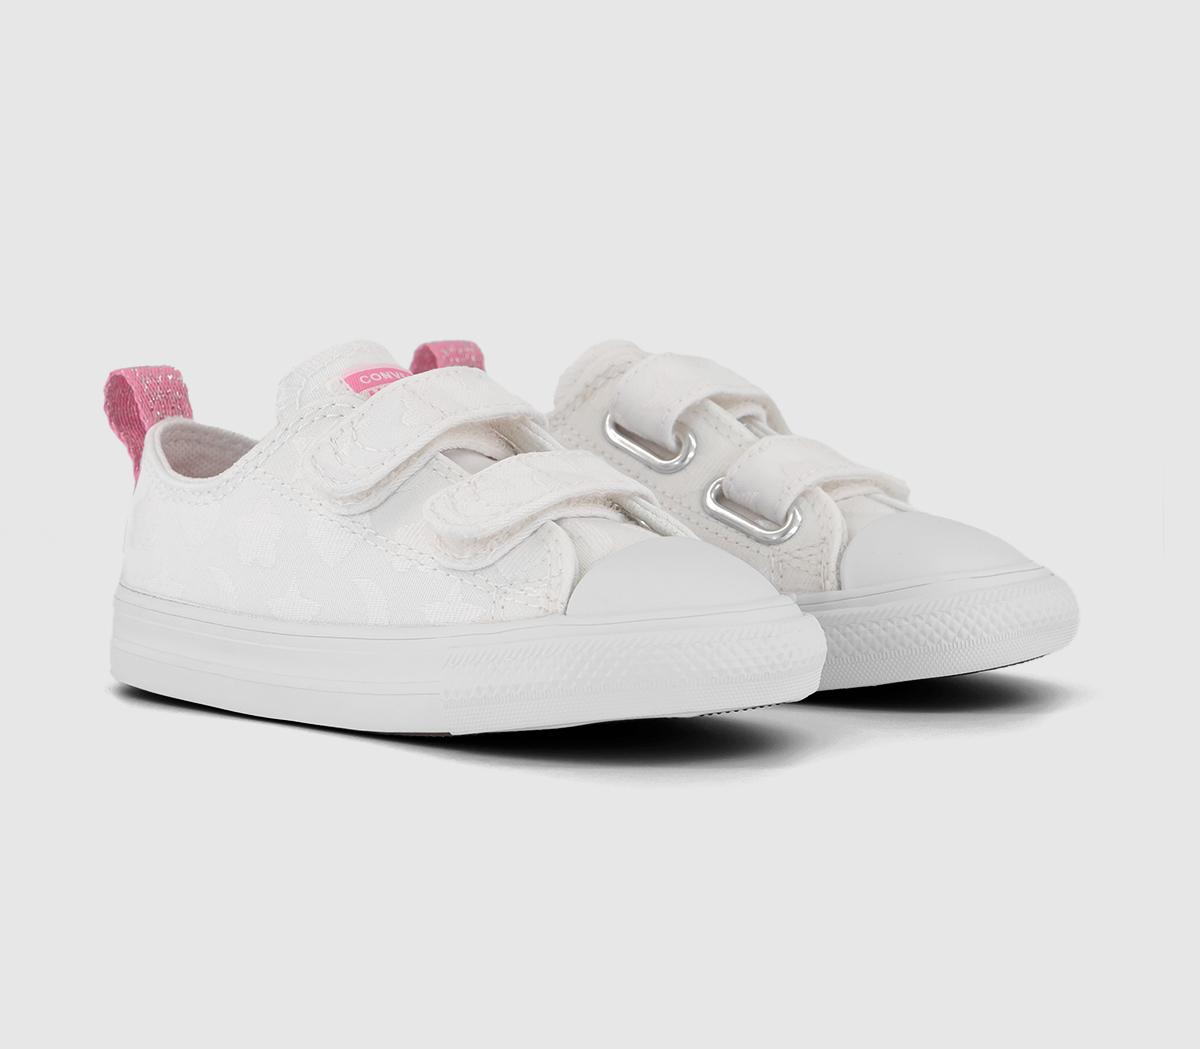 Converse Kids All Star 2vlace Trainers White Oops Pink, 9infant